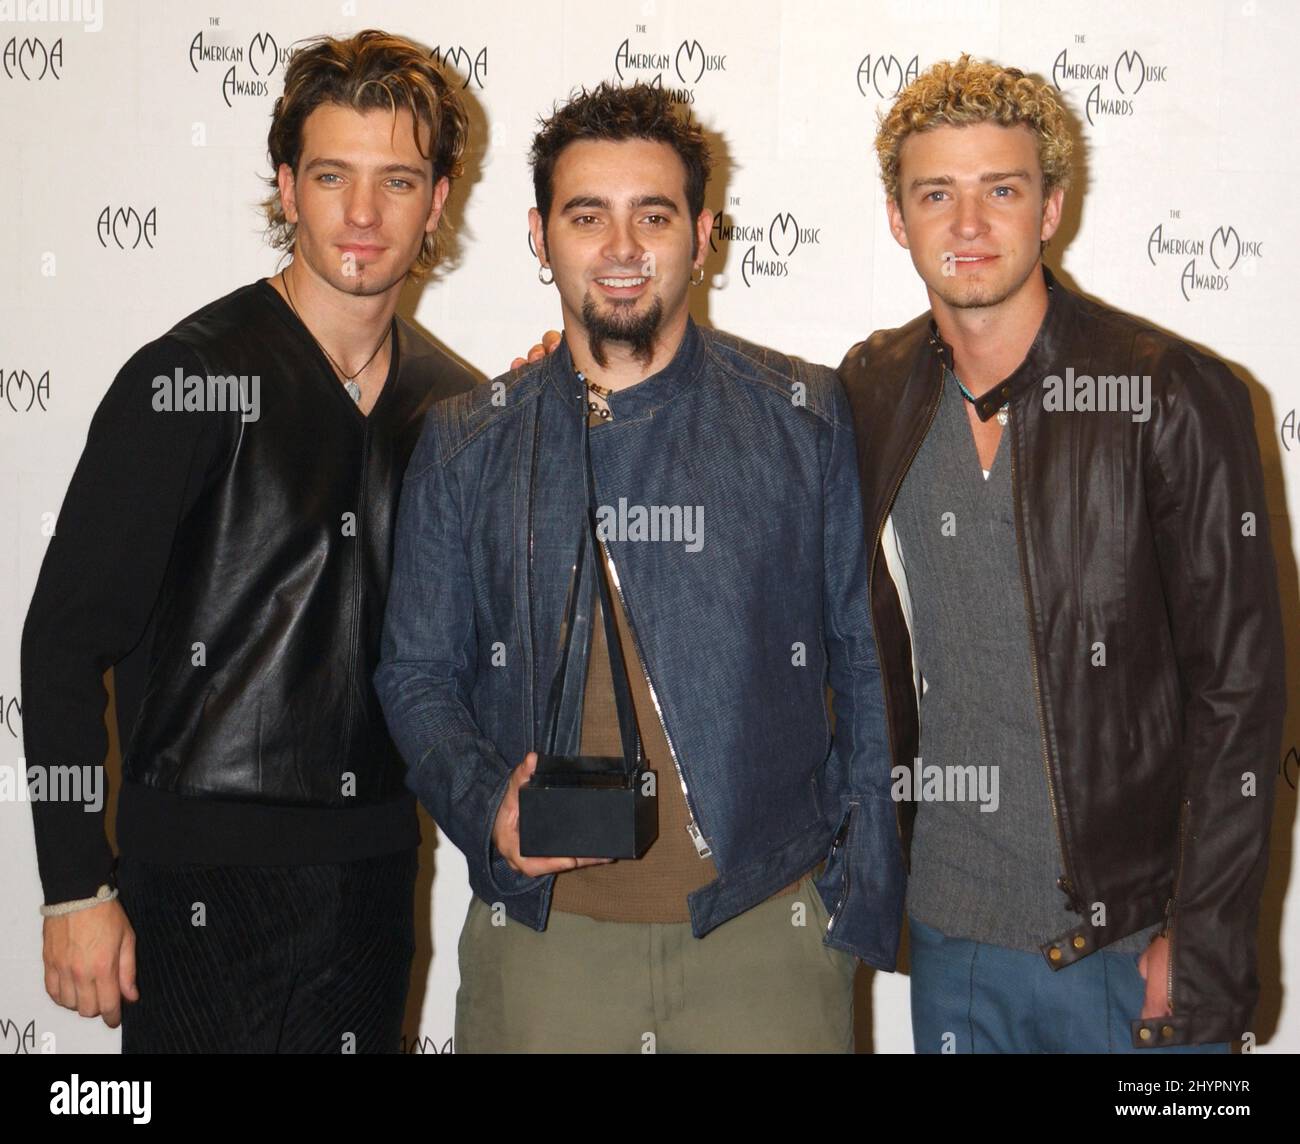 J.C Chasez, Chris Kirkpatrick & Justin Timberlake attend the 2002 American Music Awards in Los Angeles. Picture: UK Press Stock Photo